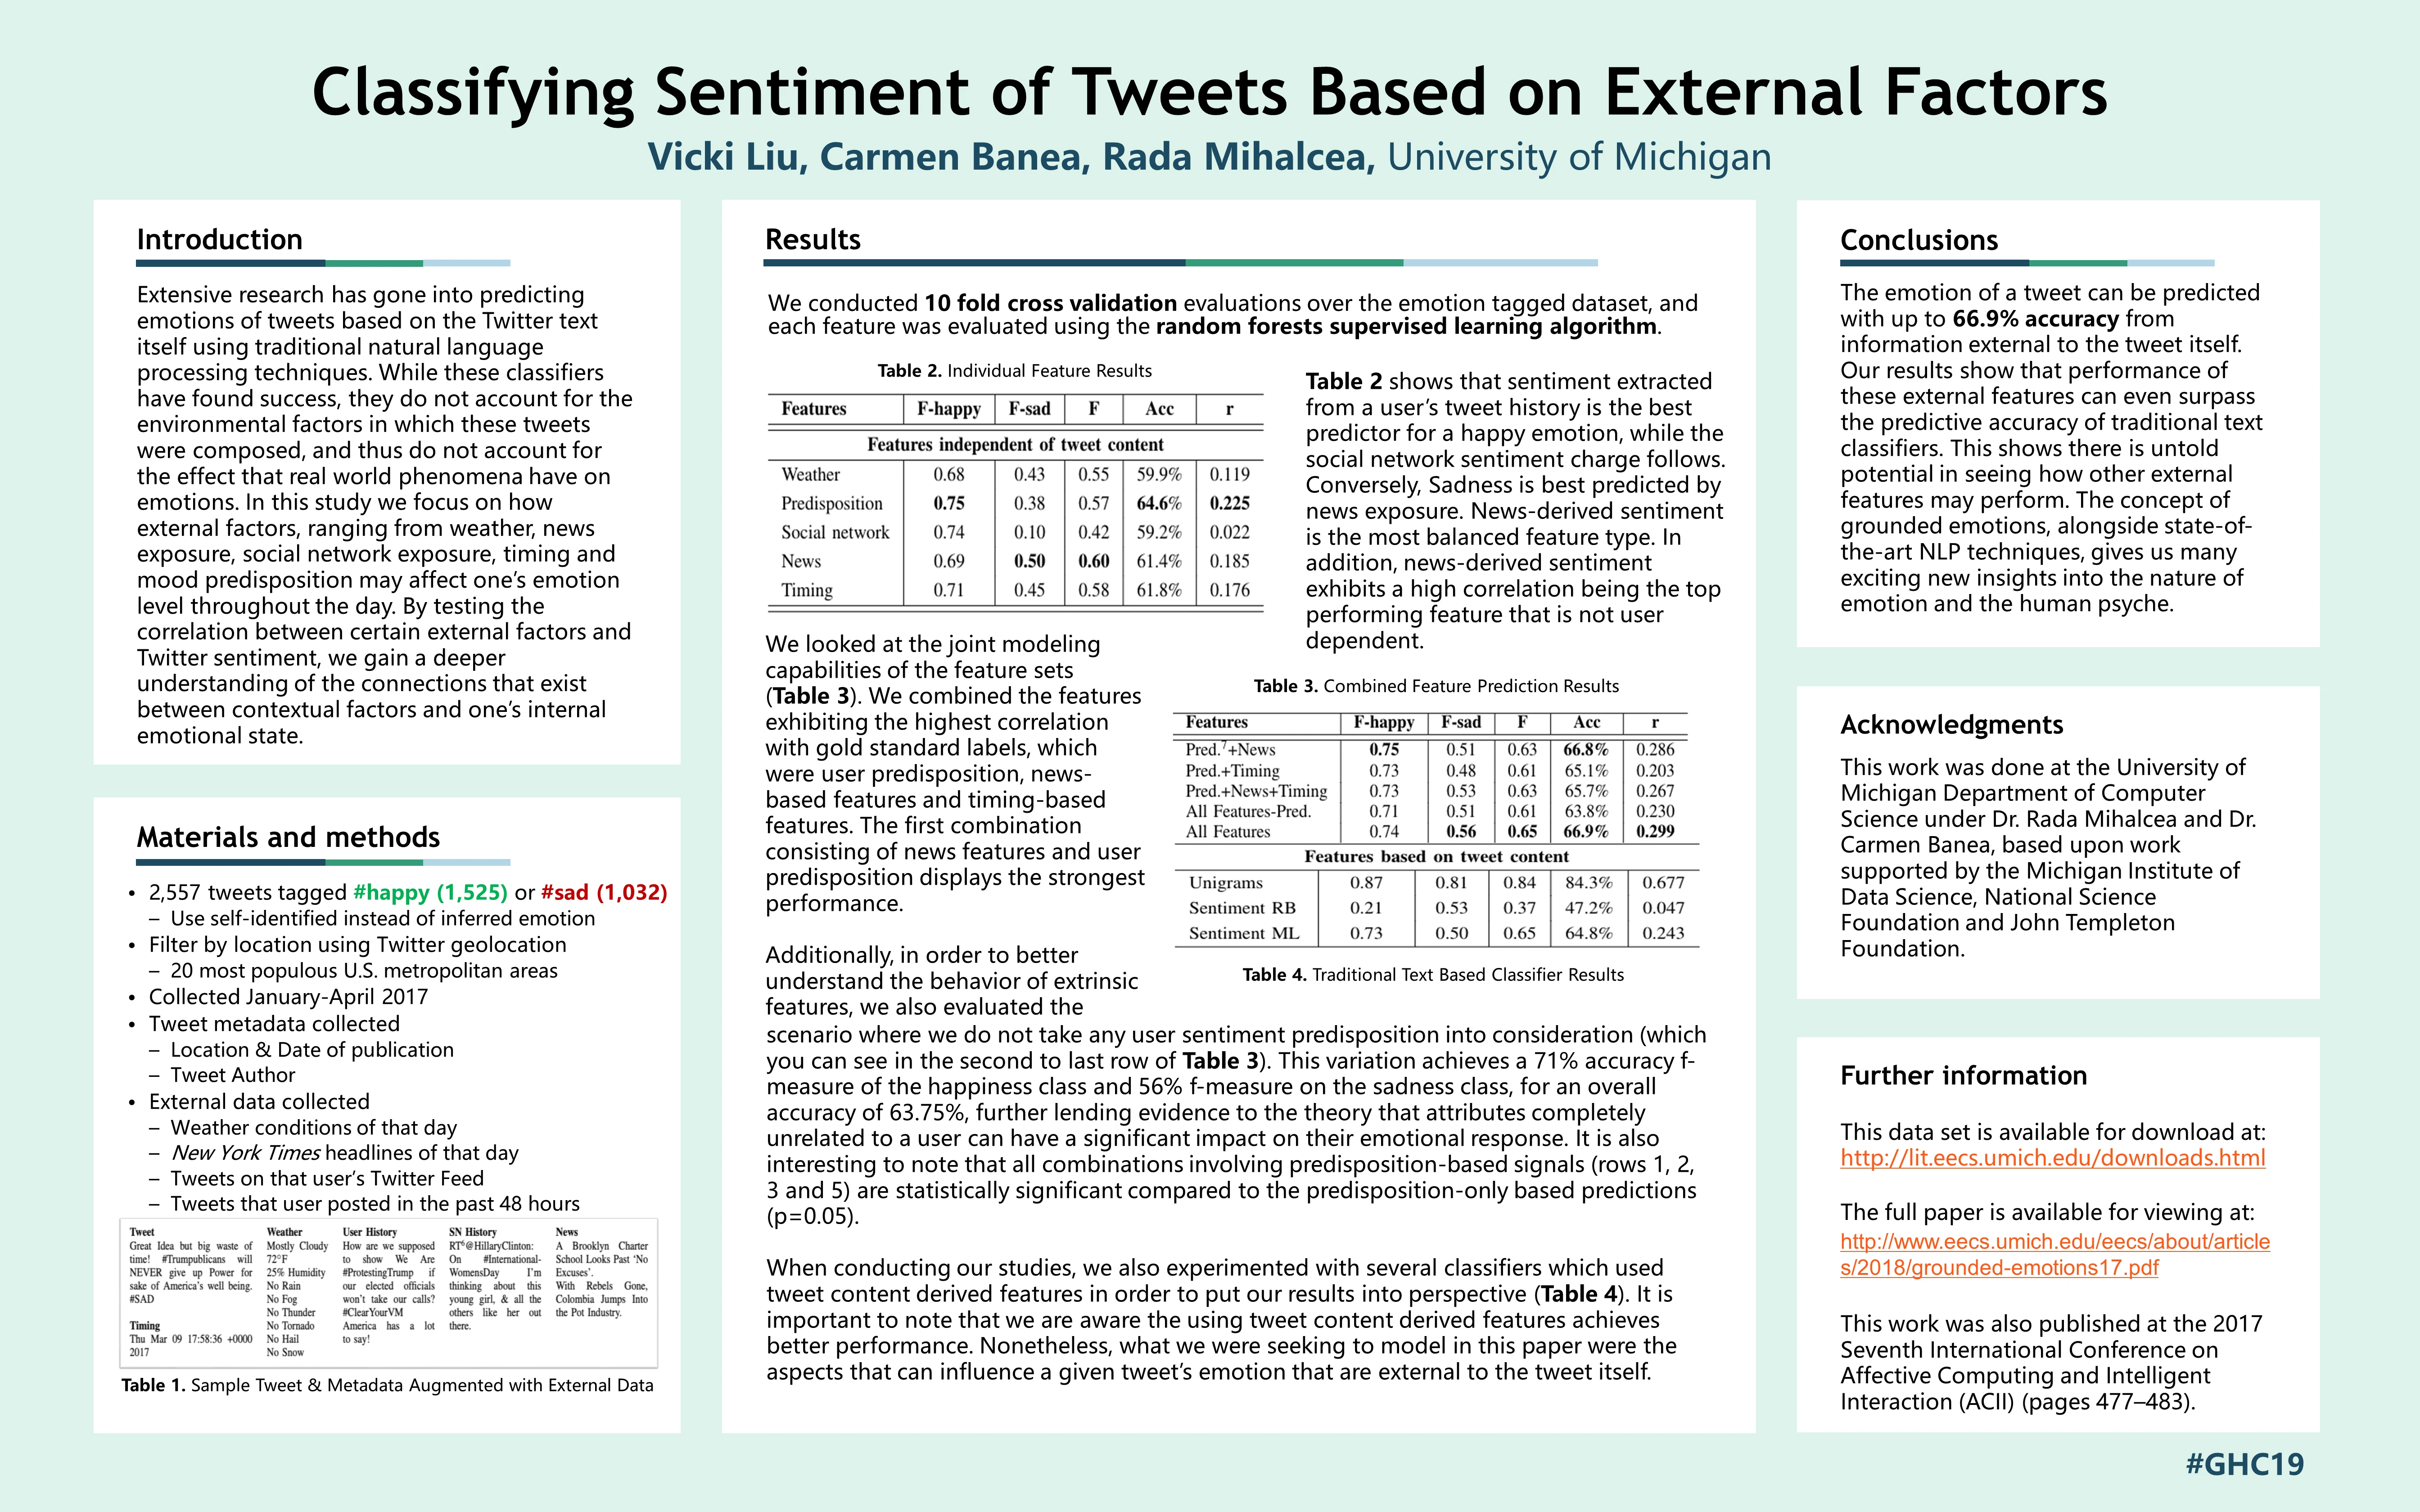 An introductory slide on Classifying Sentiment of Tweets Based on External Factors delves into materials, methods, results, conclusions, acknowledgements and some additional information.